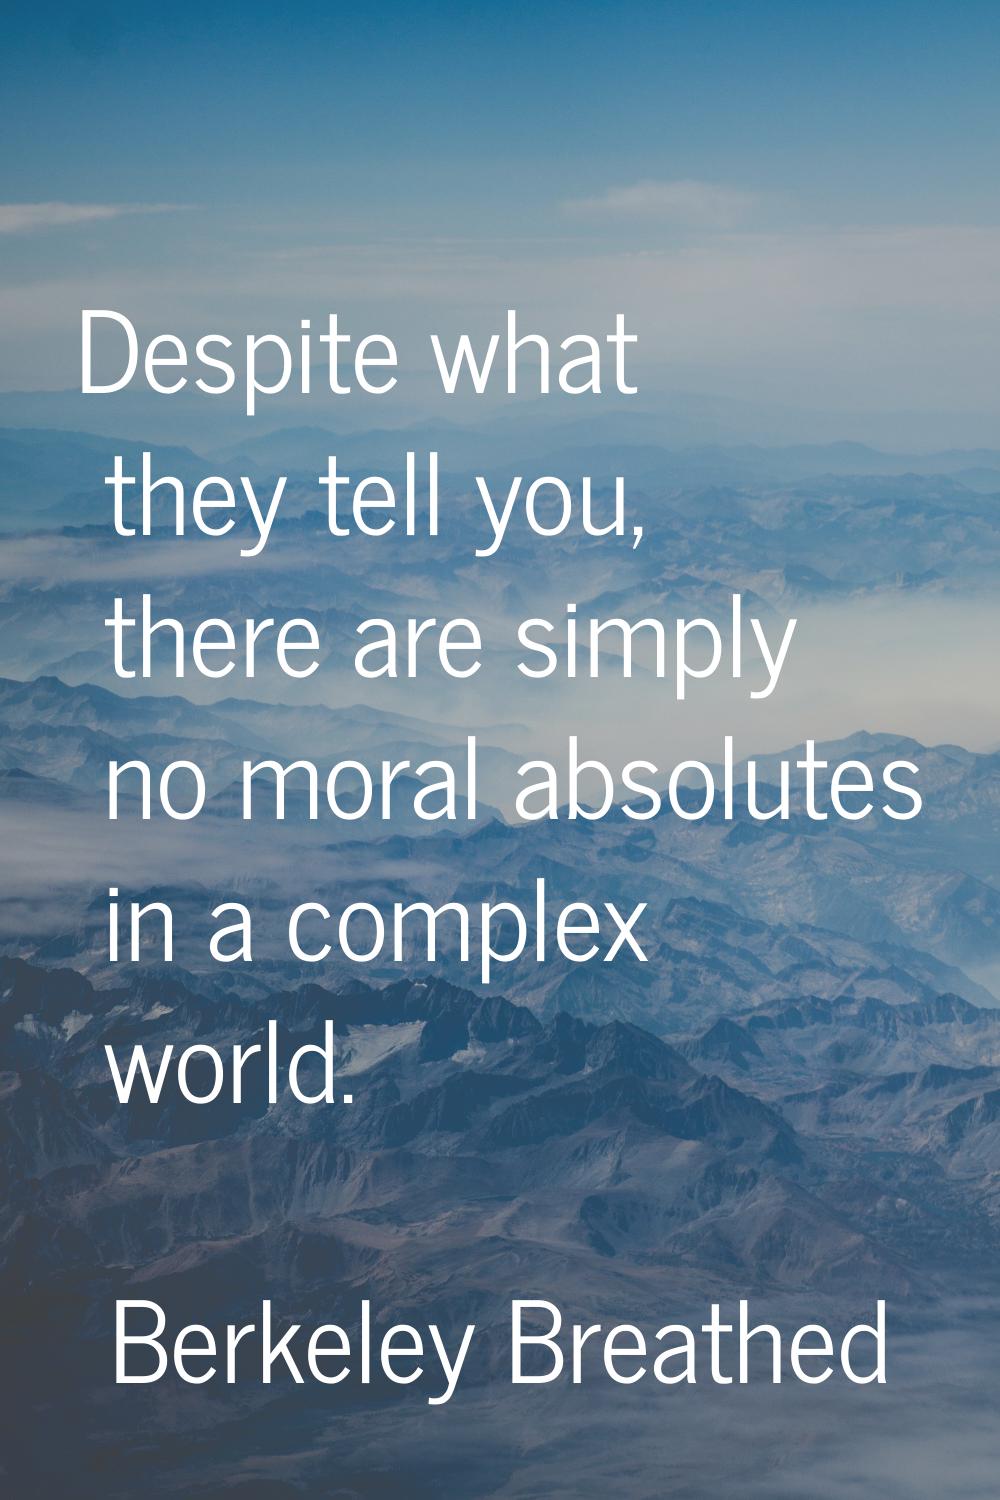 Despite what they tell you, there are simply no moral absolutes in a complex world.